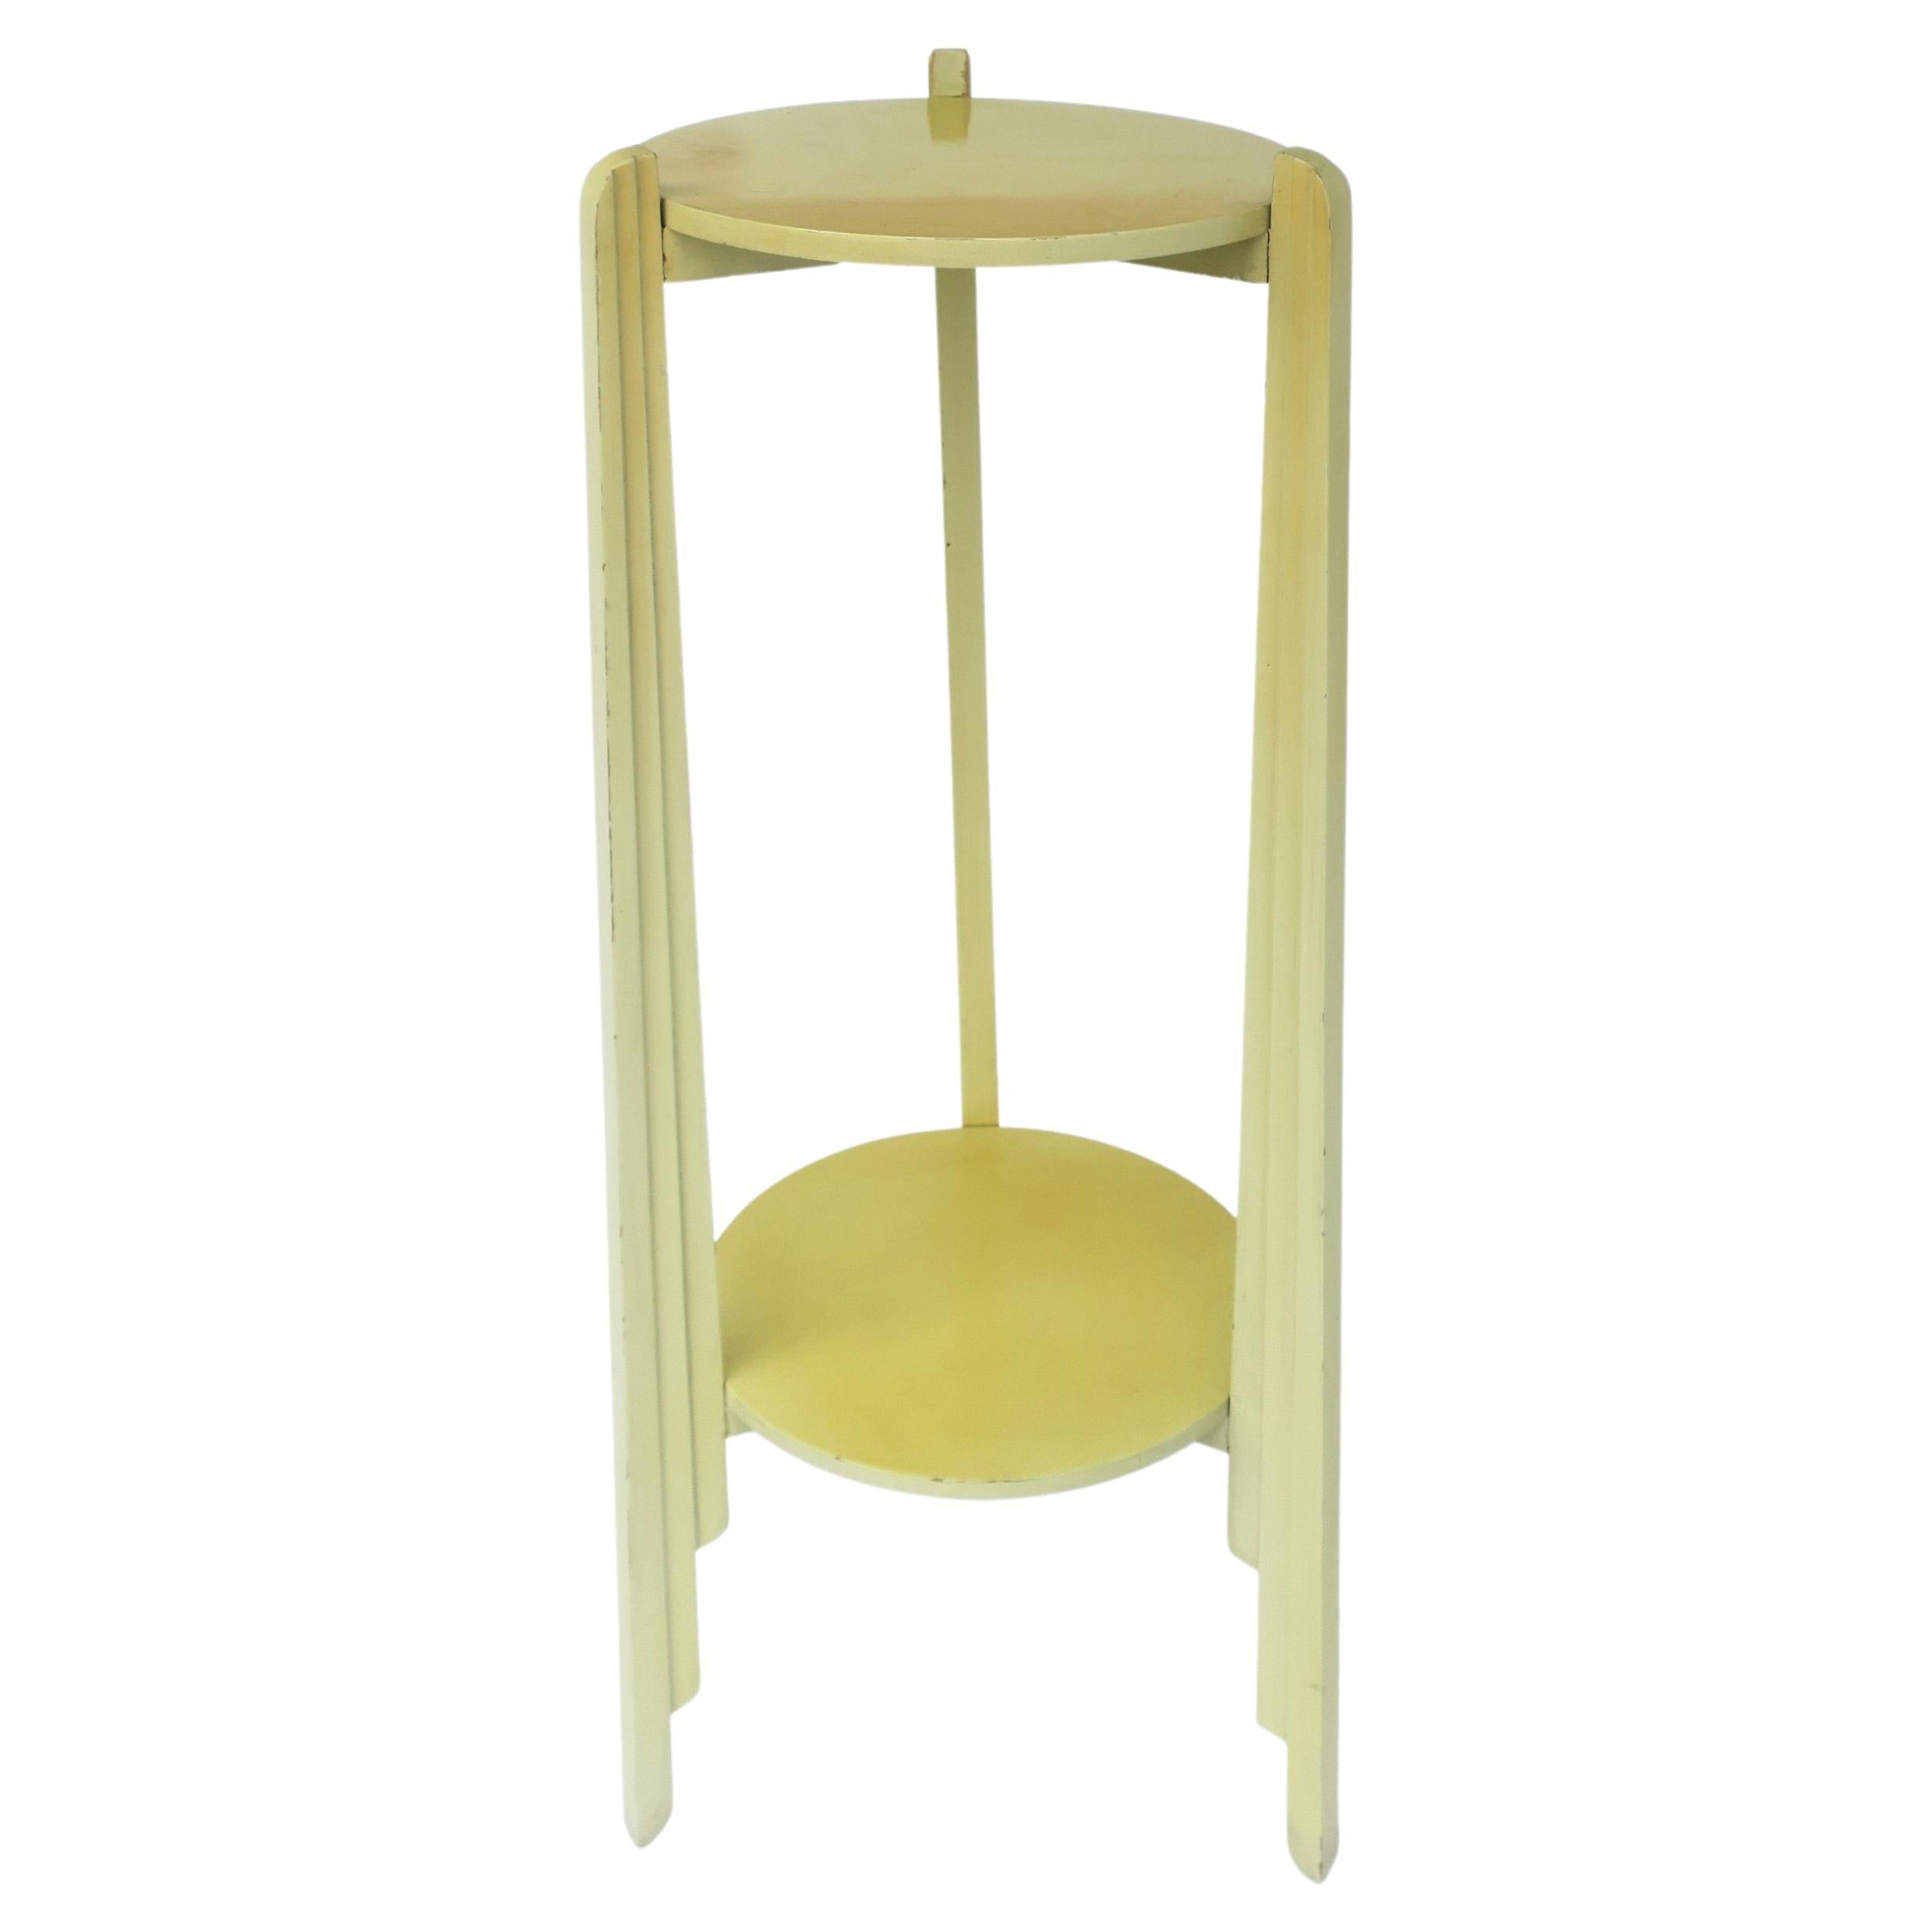 Yellow Art Deco Column Pillar Pedestal Stand with Lower Shelf, 1 of 2 Avail For Sale